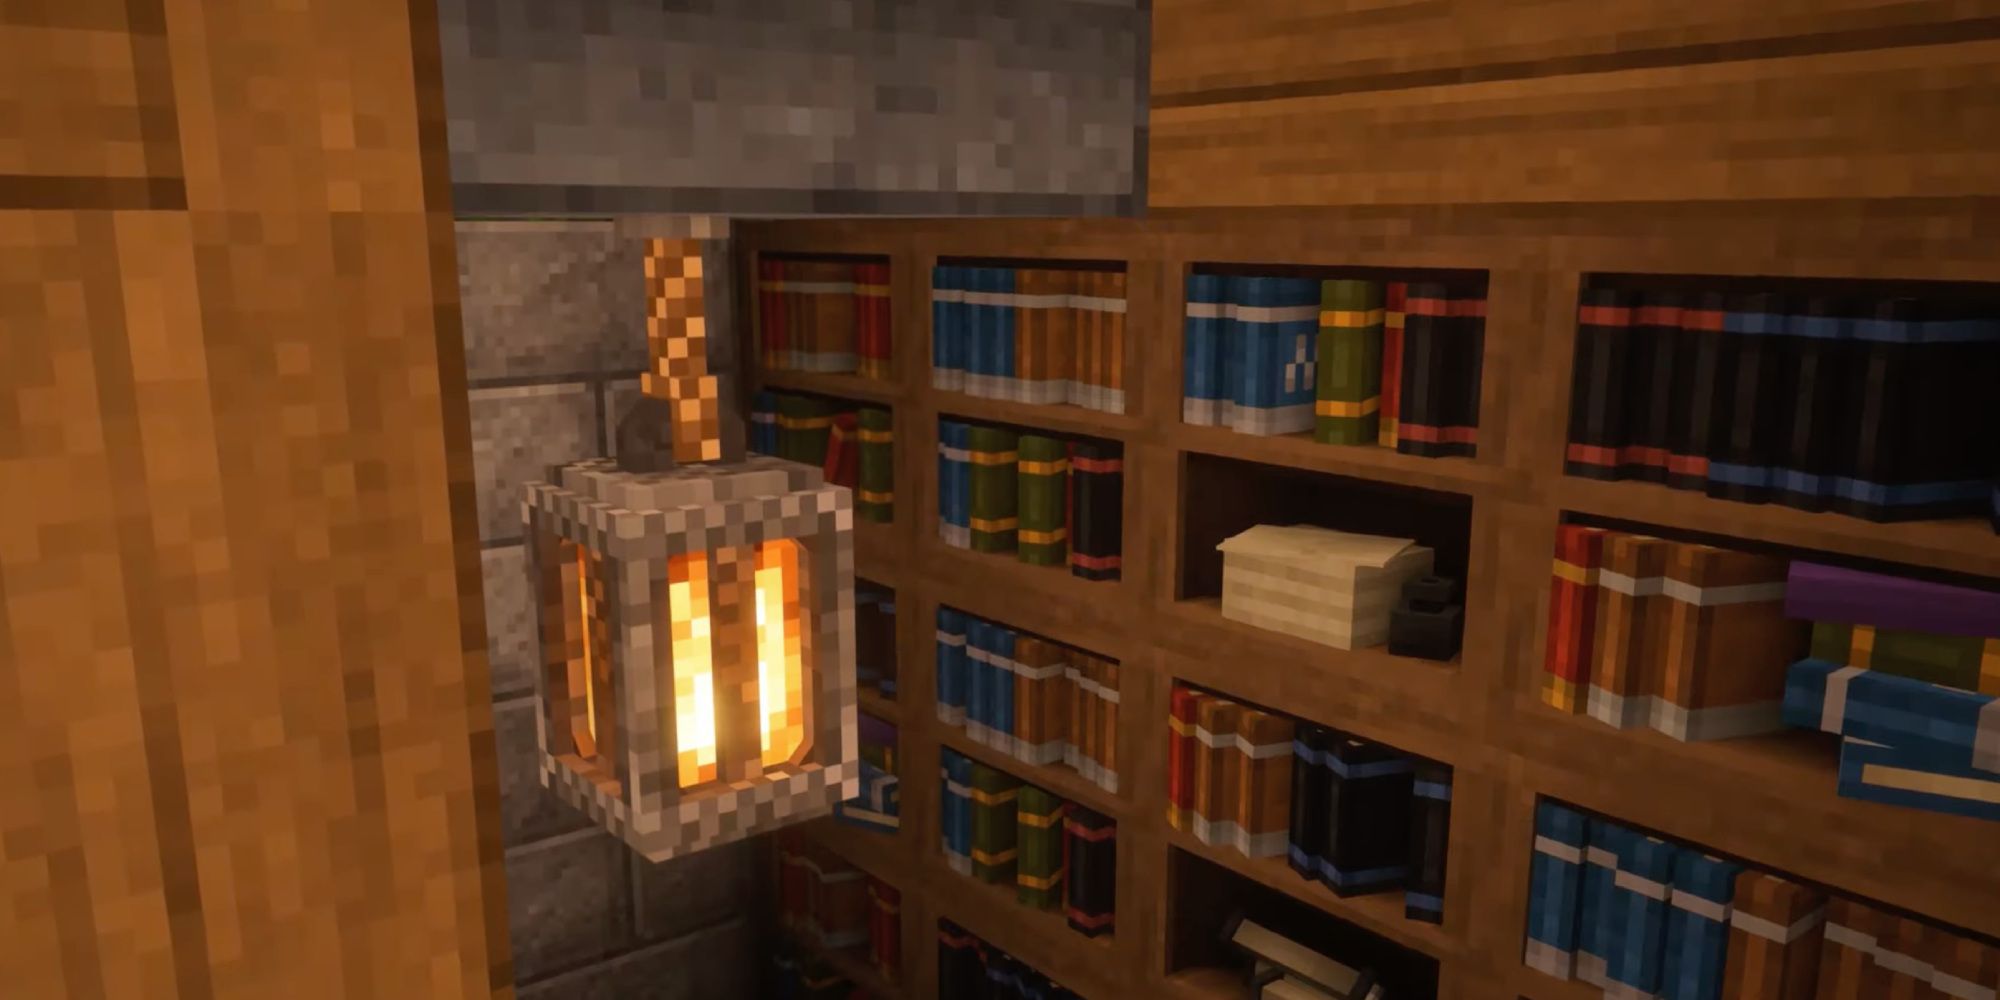 A Minecraft room with a bookshelf and a lantern designed with the Alacrity resource pack.